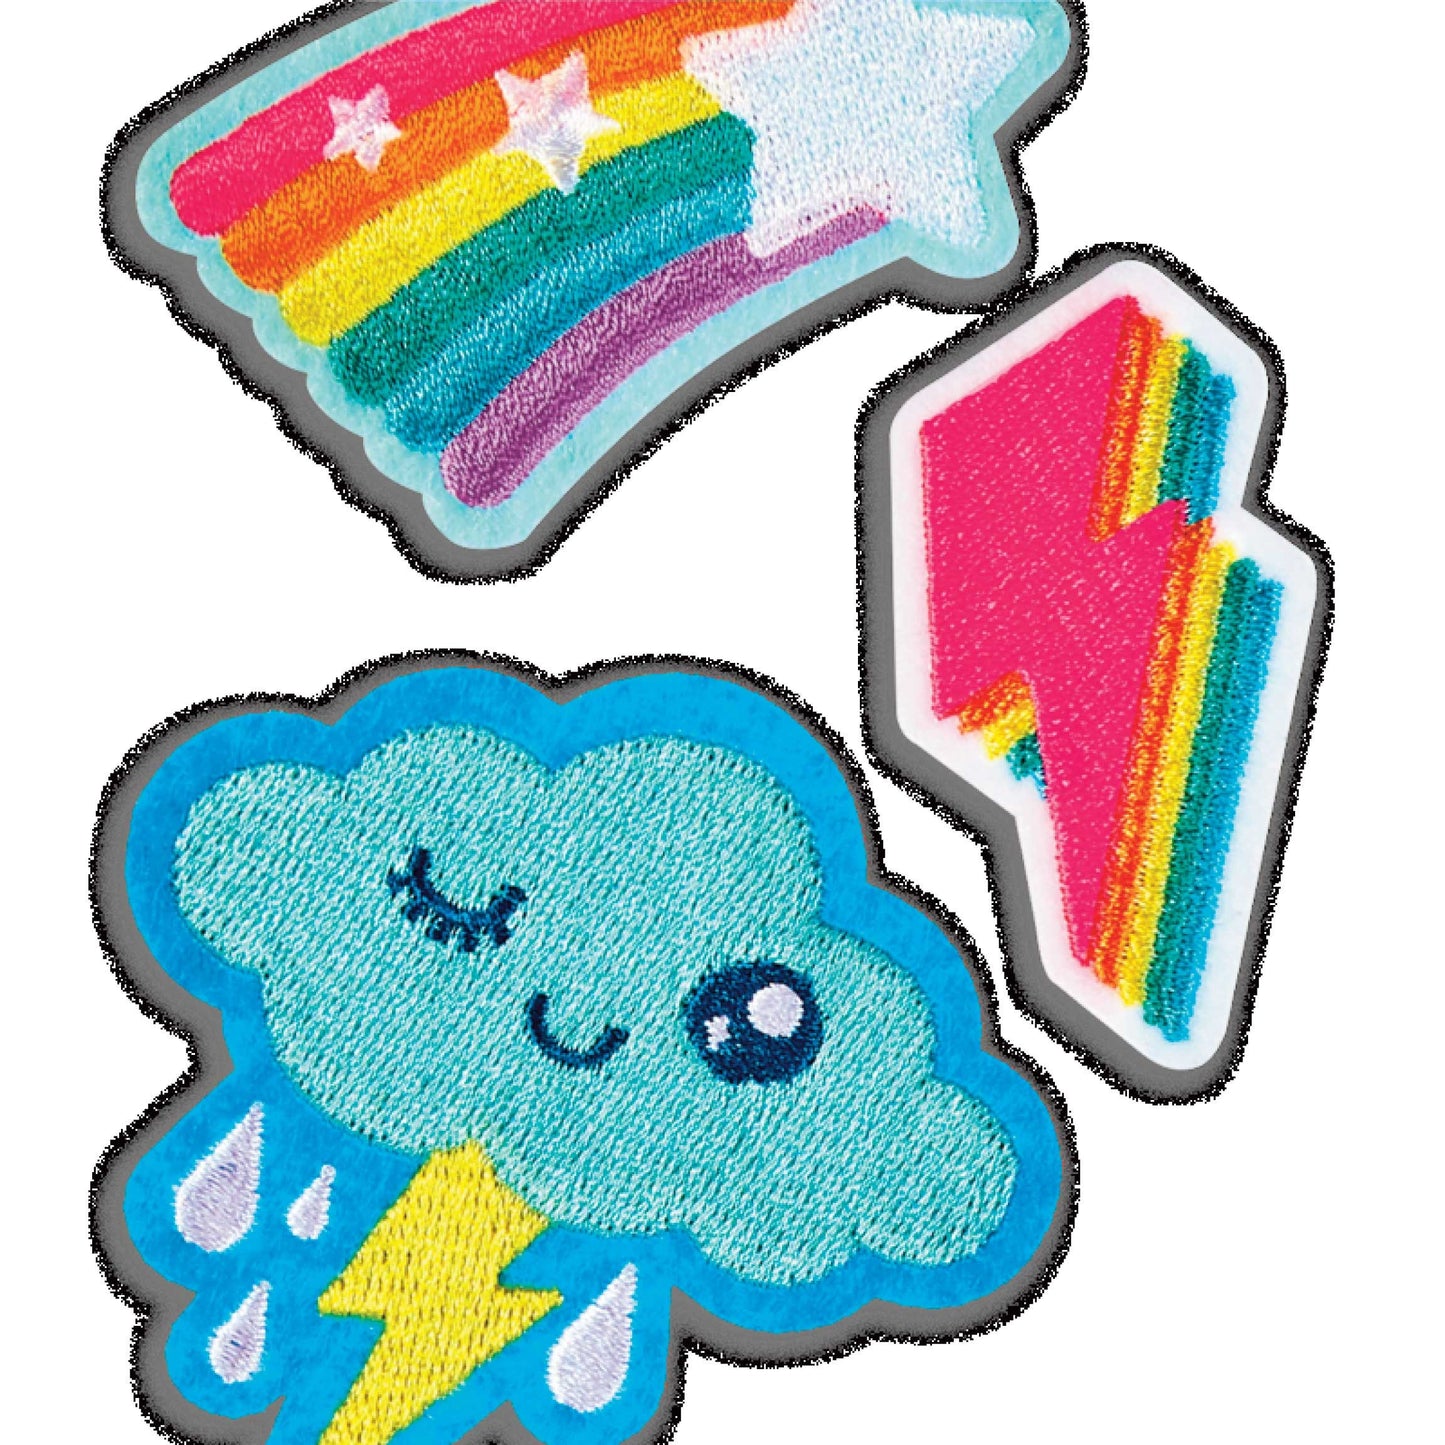 Sky Pals Iron-on Patches: OOLY Rainbow Star